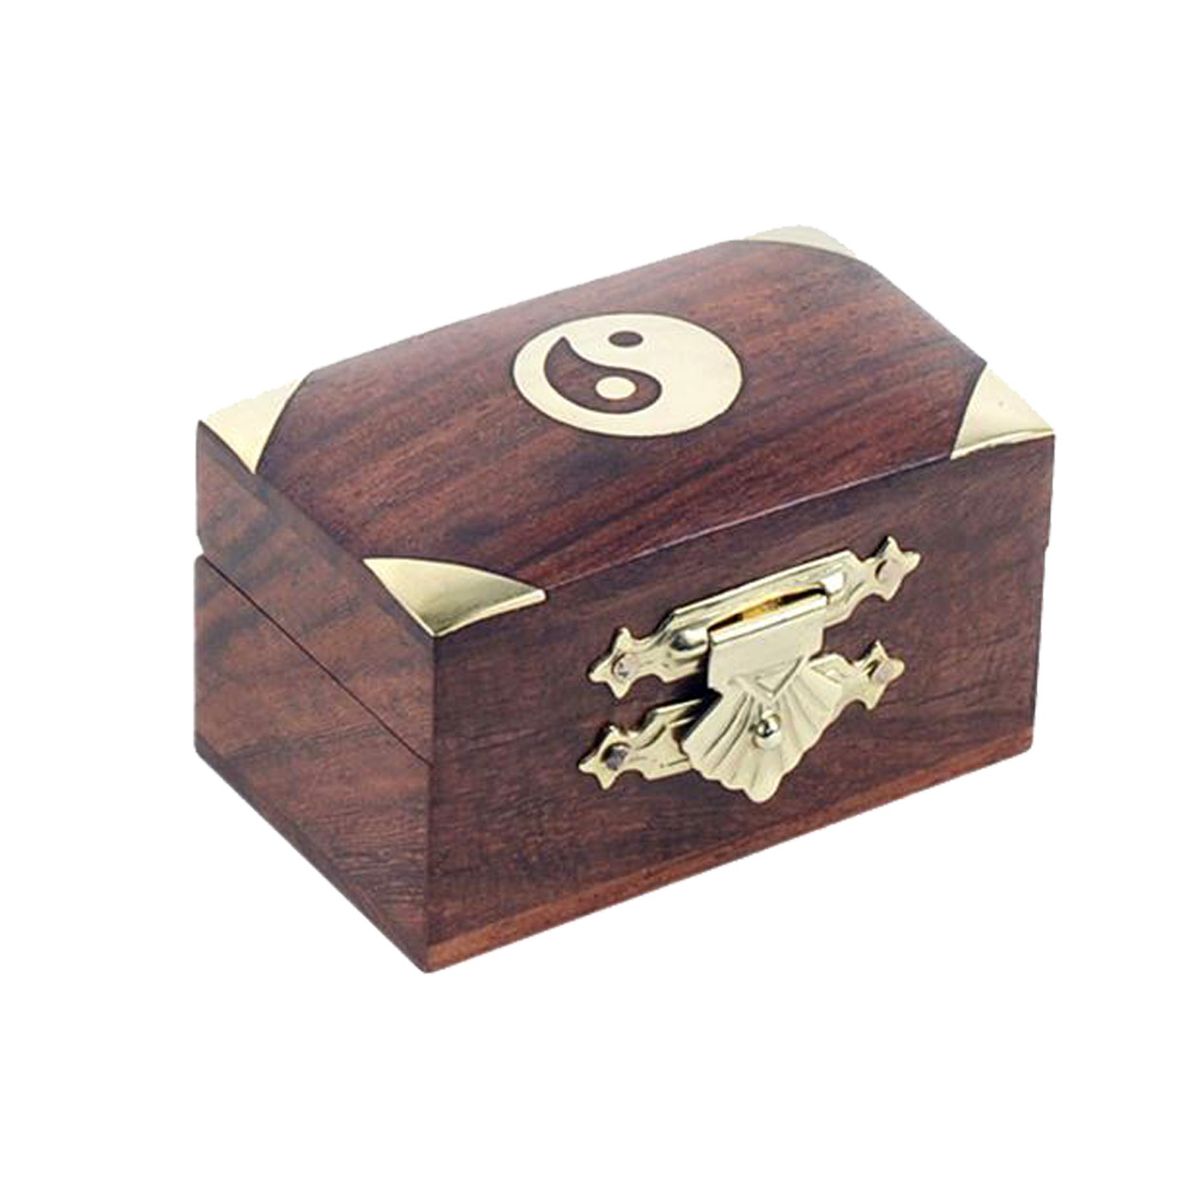 Wooden box with sun